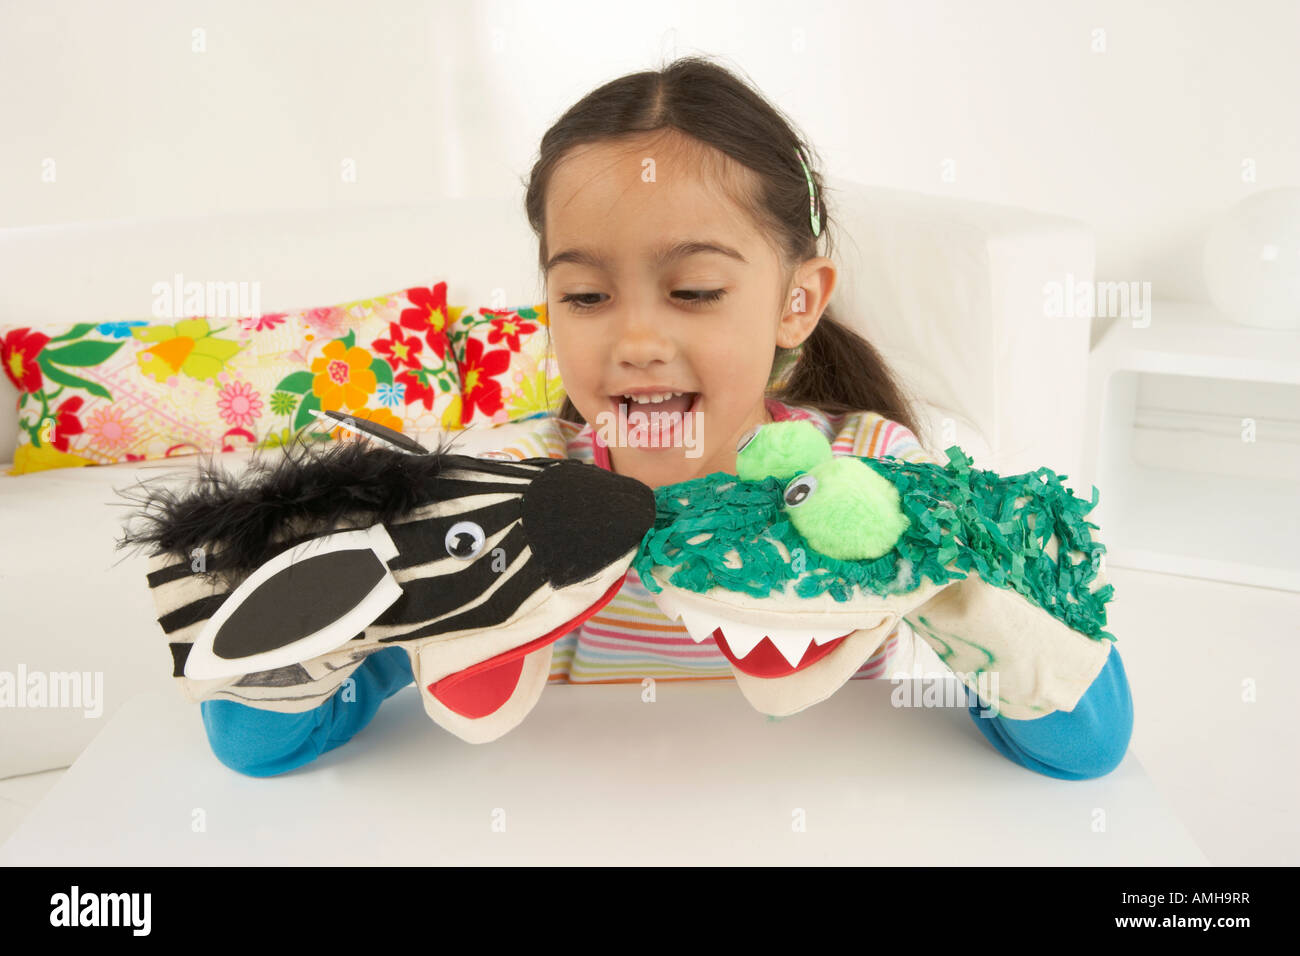 Girl plays with home made animal hand puppets in her bedroom Stock Photo